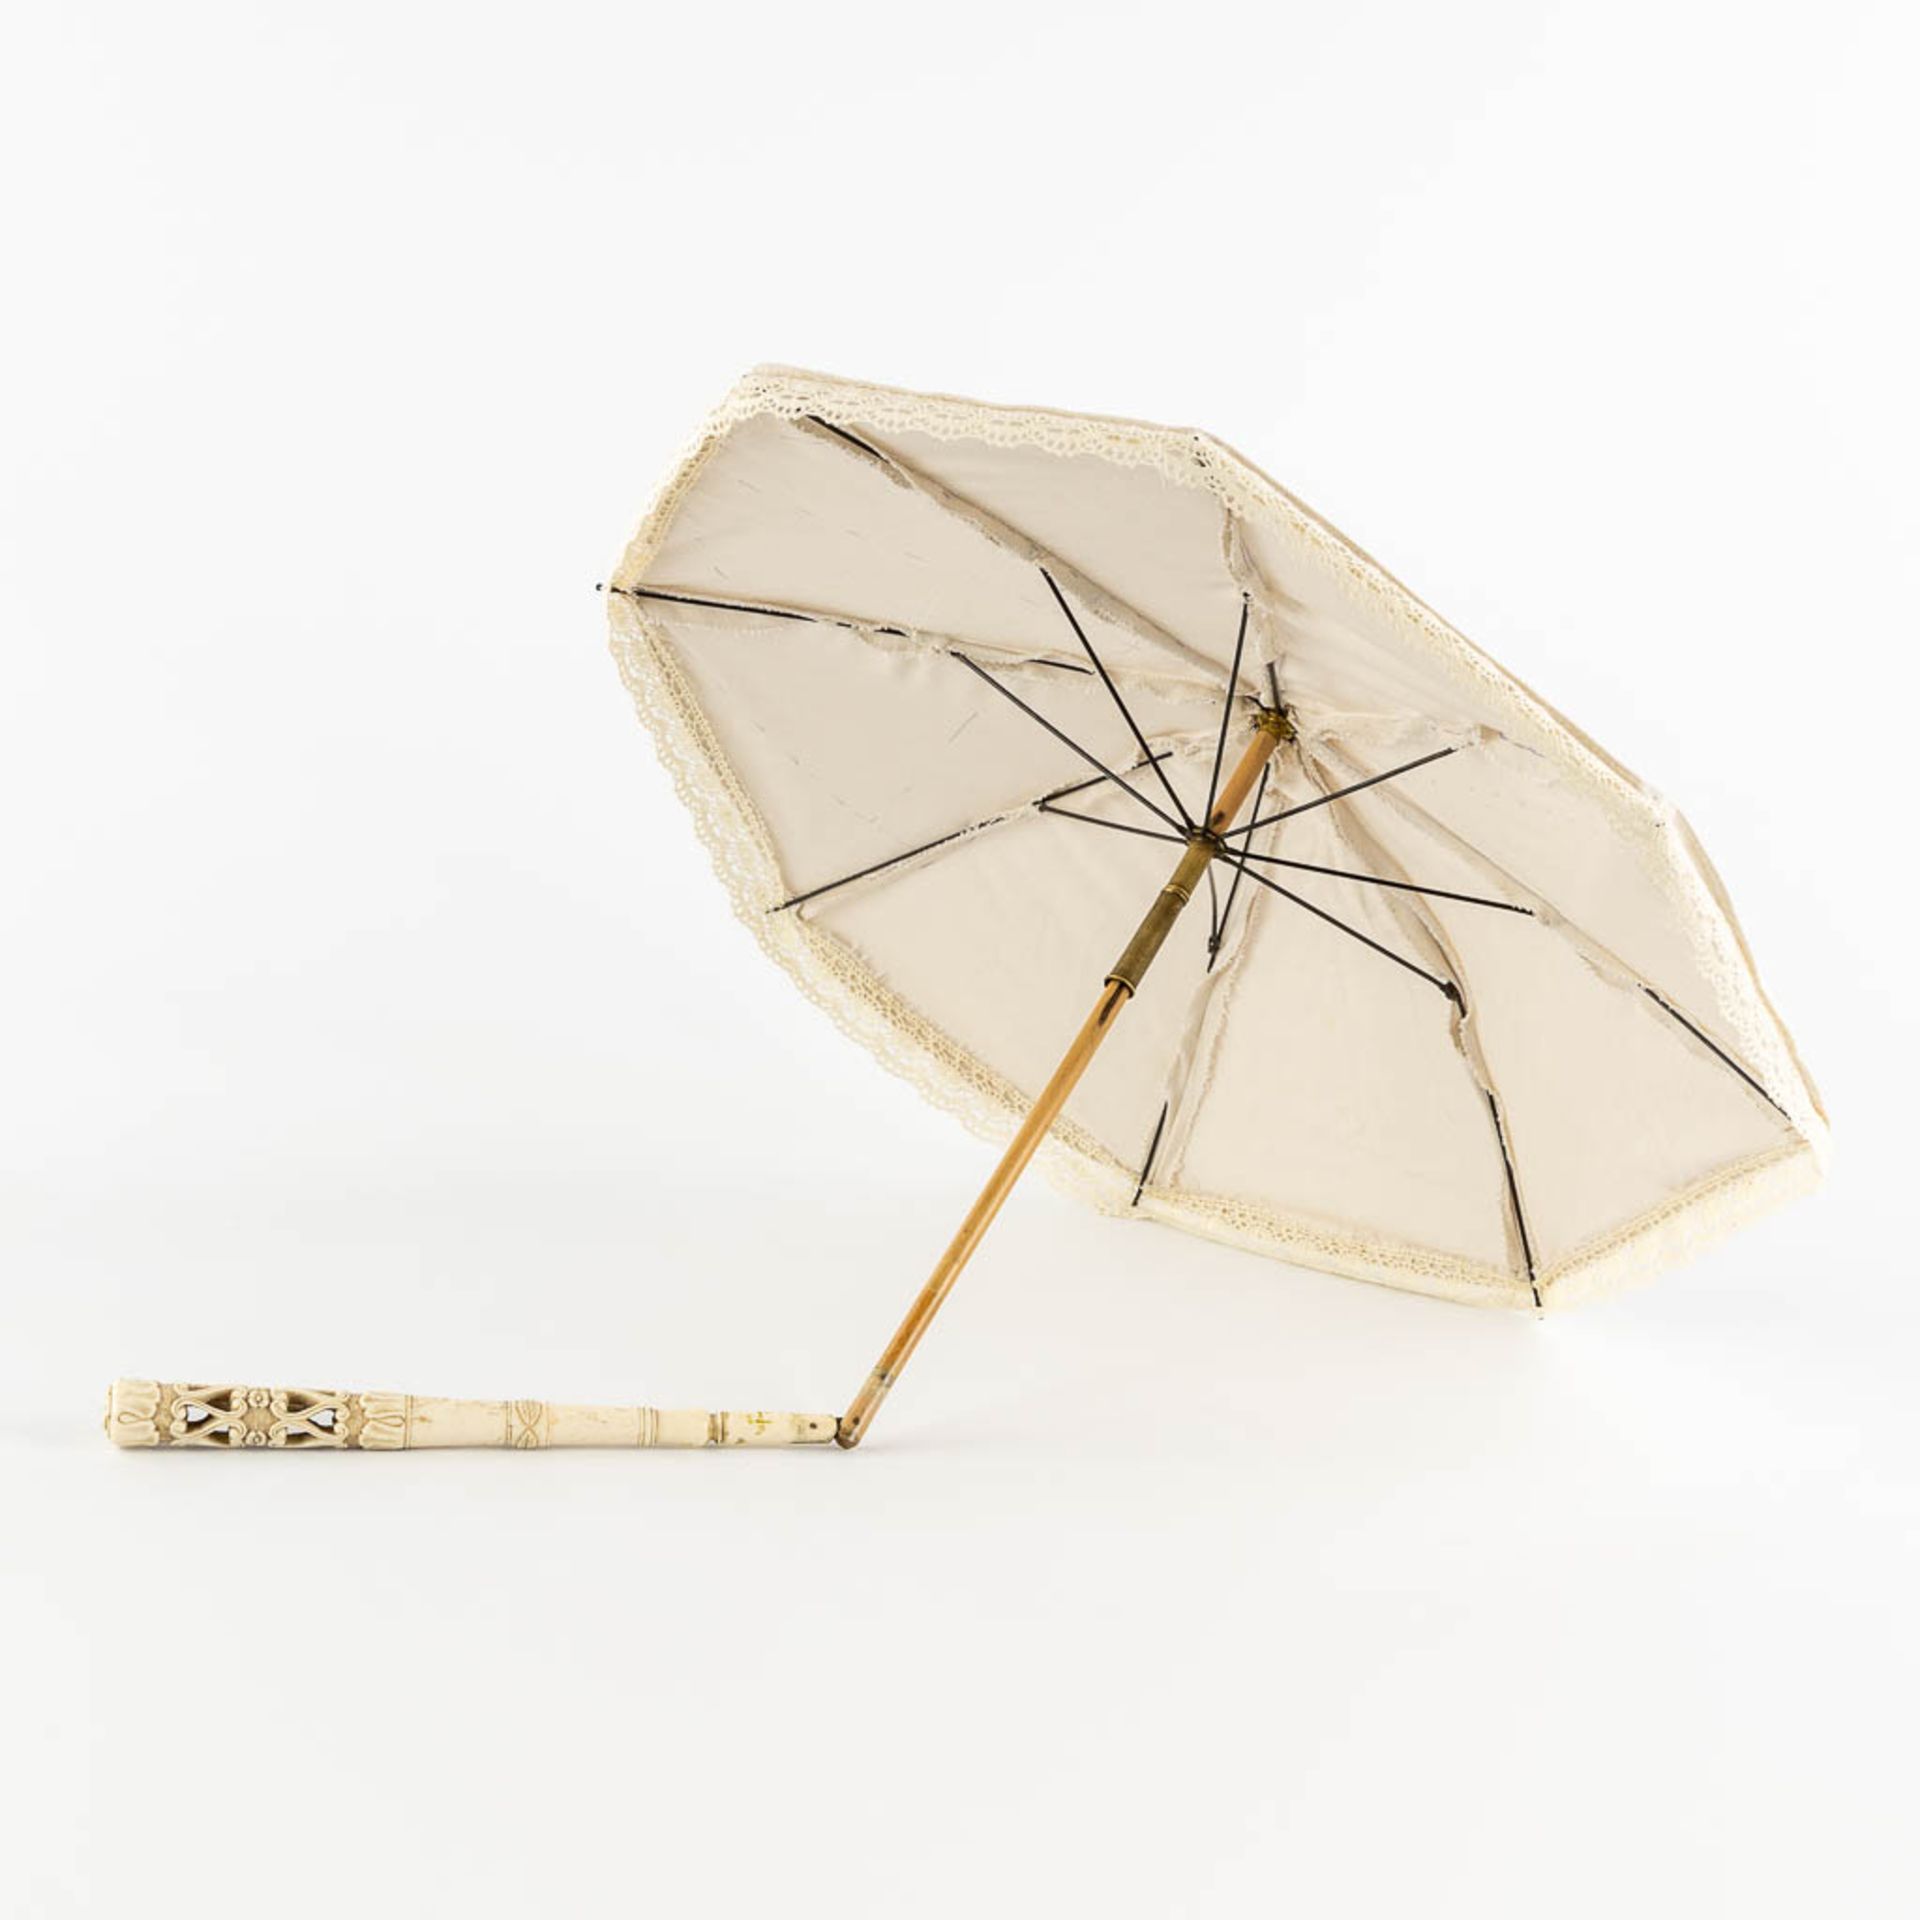 A sunshade with ivory handle, France, 19th C. (L:60 cm) - Image 3 of 11